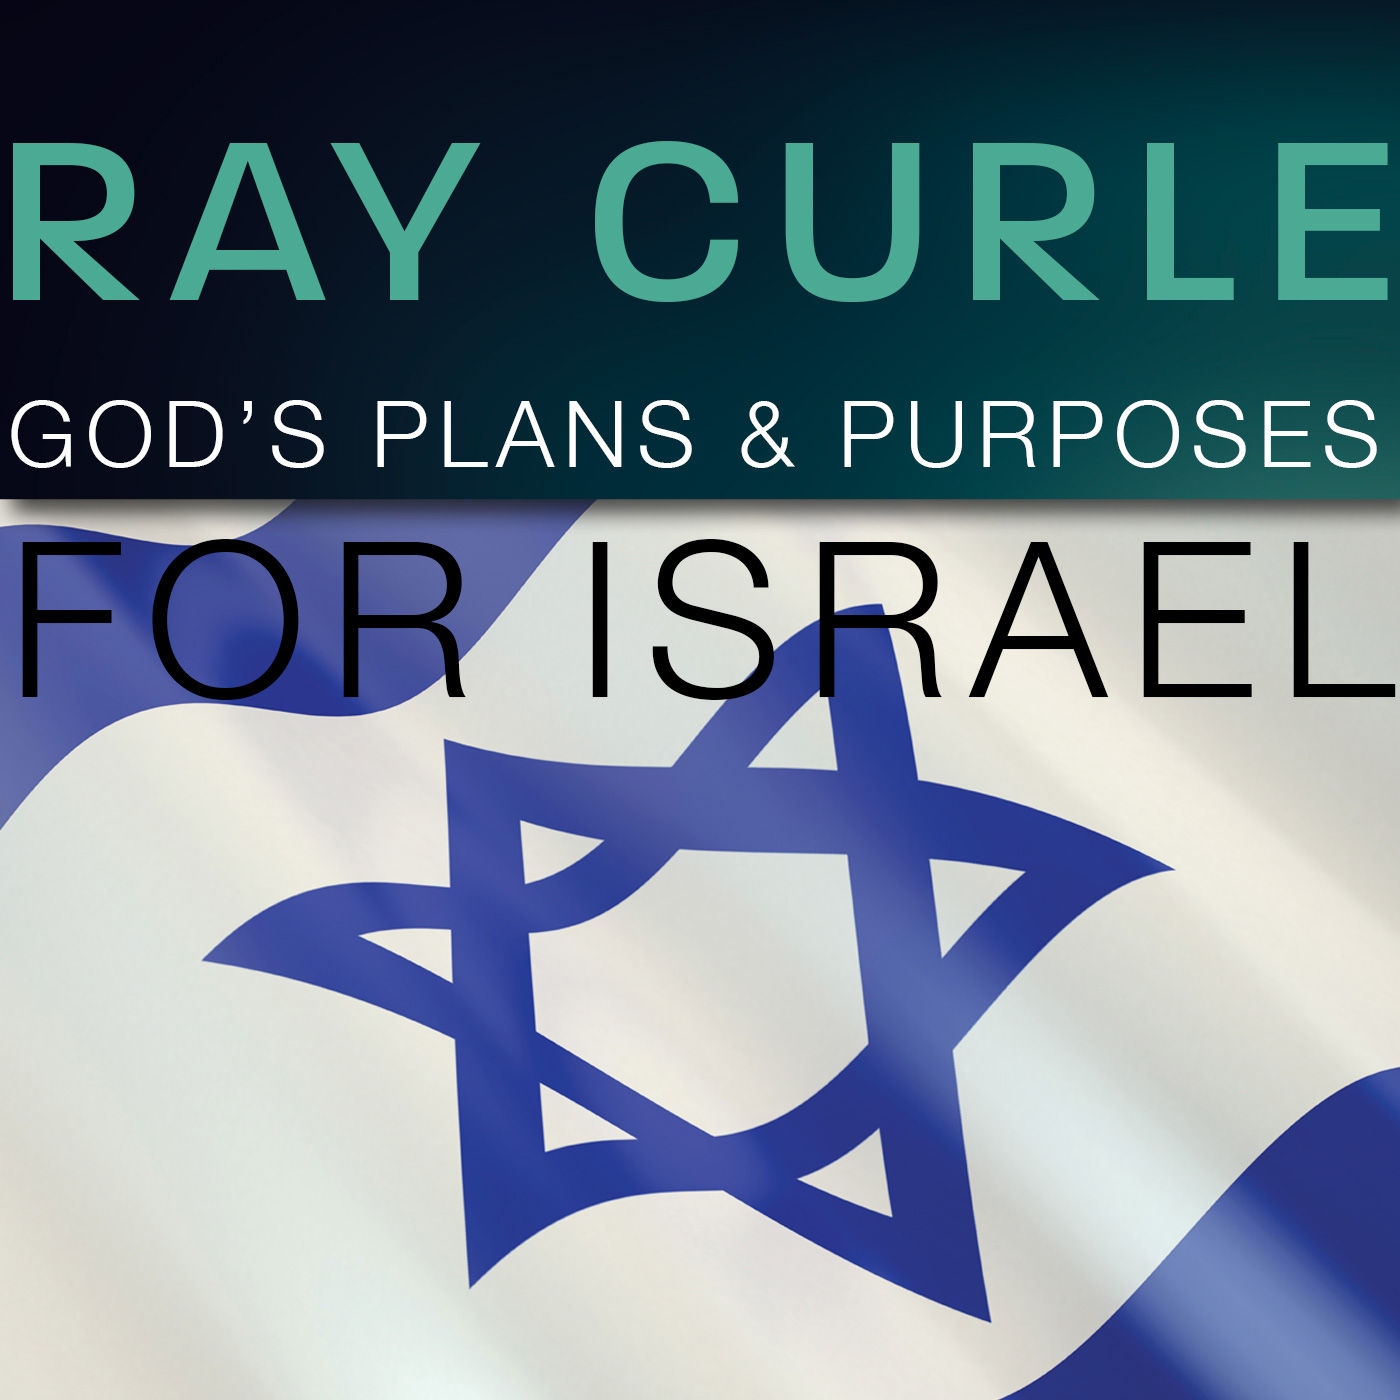 God’s Plans & Purposes for Israel